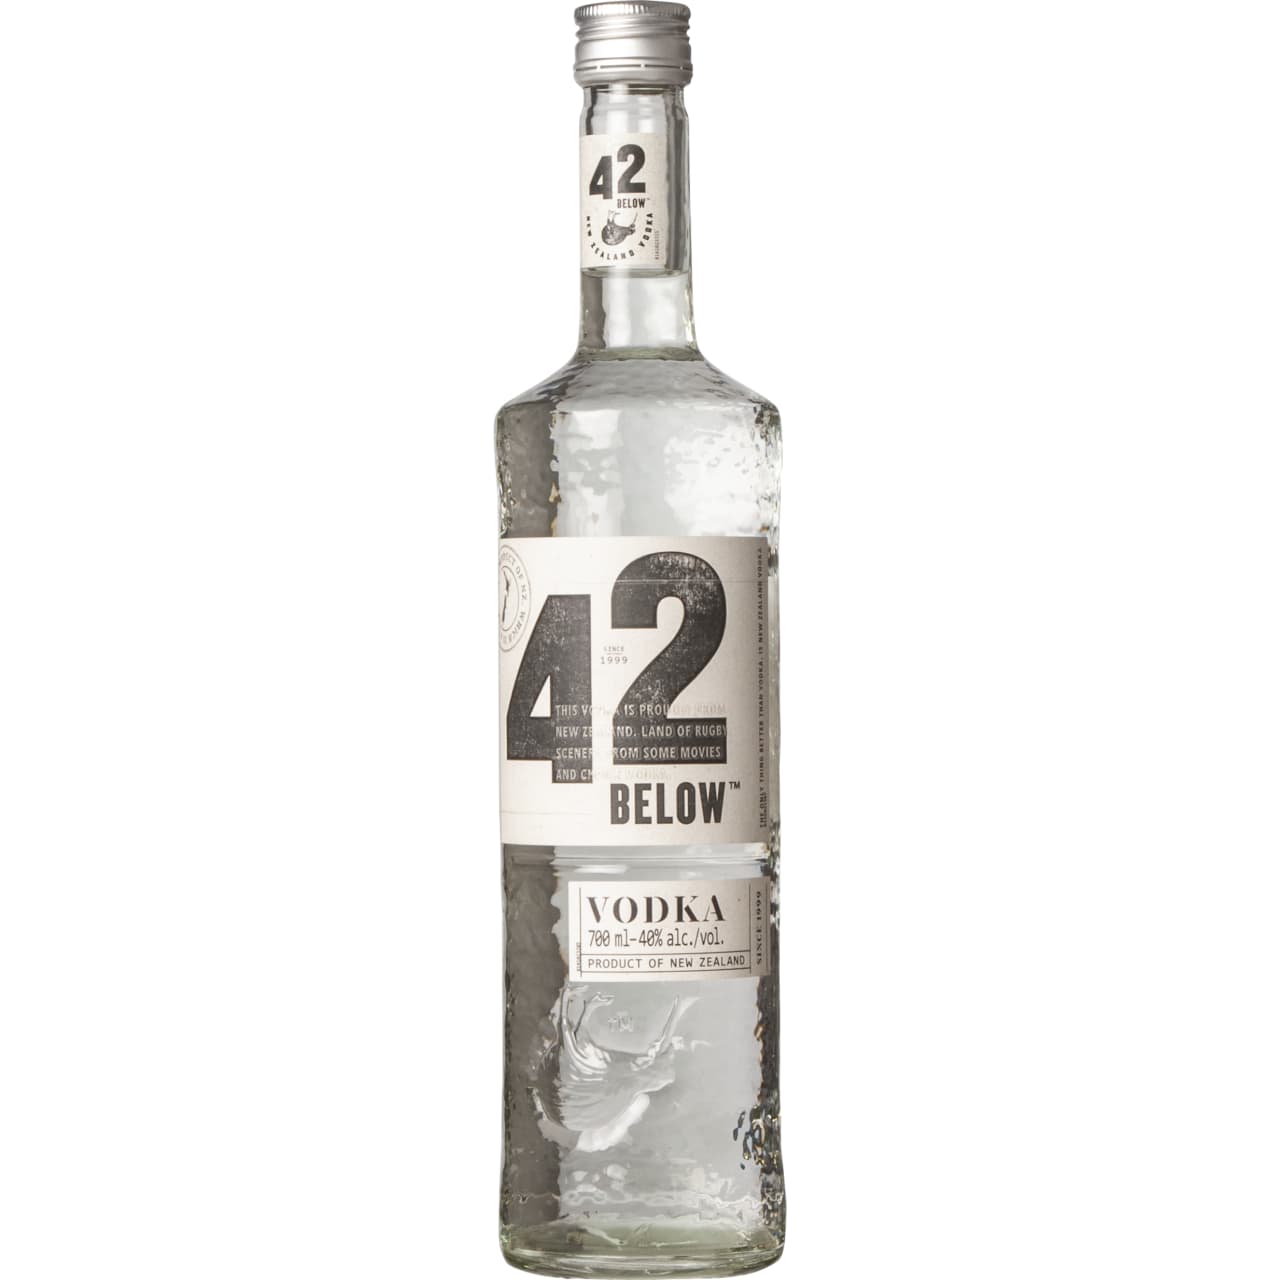 42 Below is an indicative name, referring to 42 degrees below the equator: the latitude at which the vodka is produced. The air in New Zealand is of such a wonderful purity that it's considered a benchmark for the rest of the world to aim for.